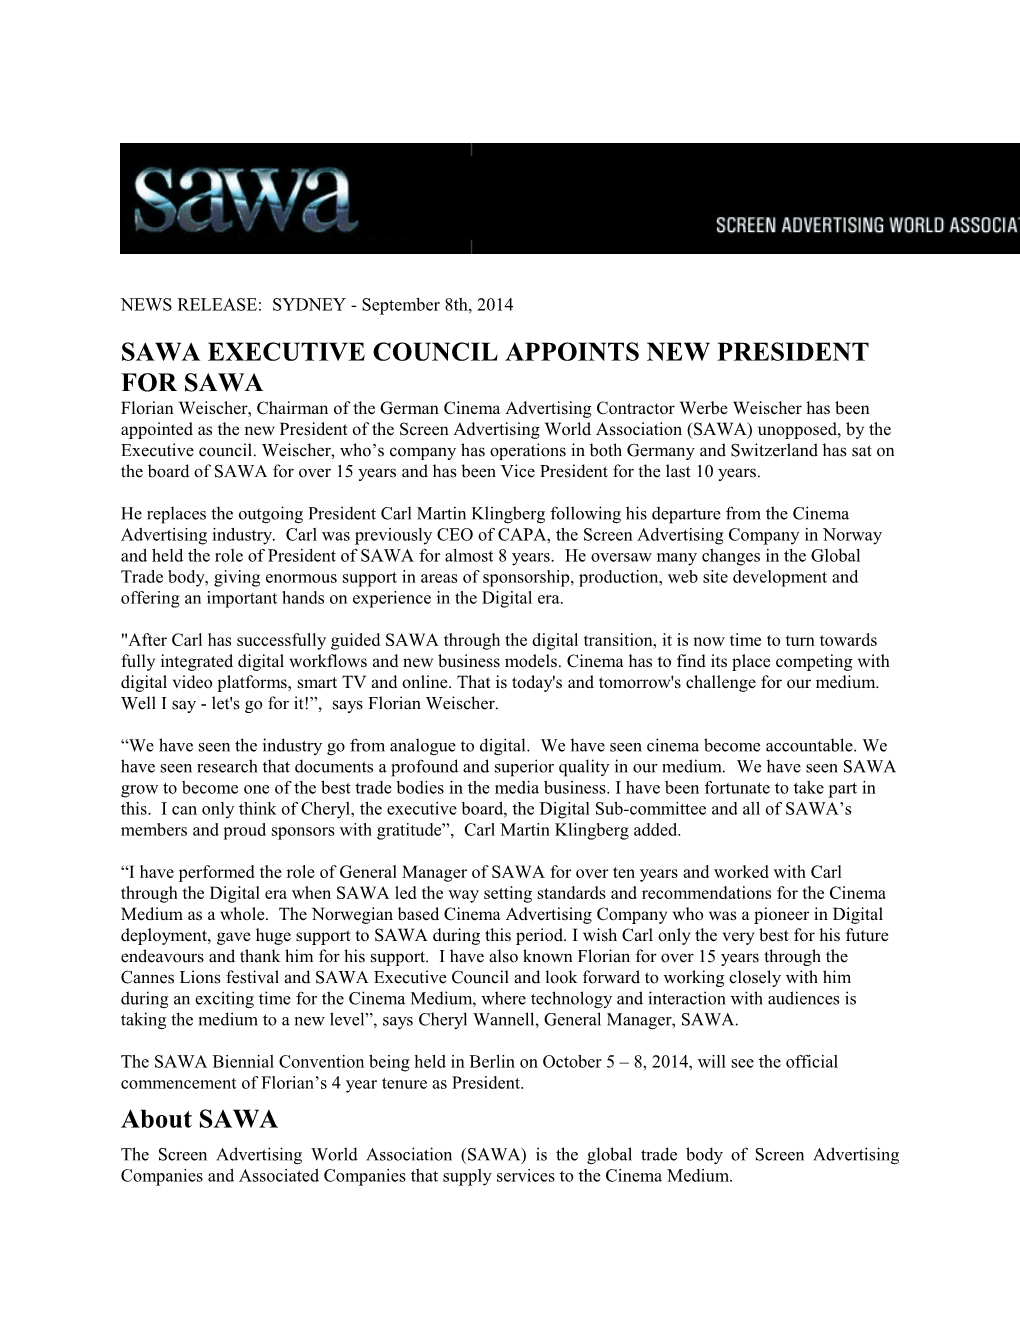 Sawa Executive Council Appoints New President for Sawa